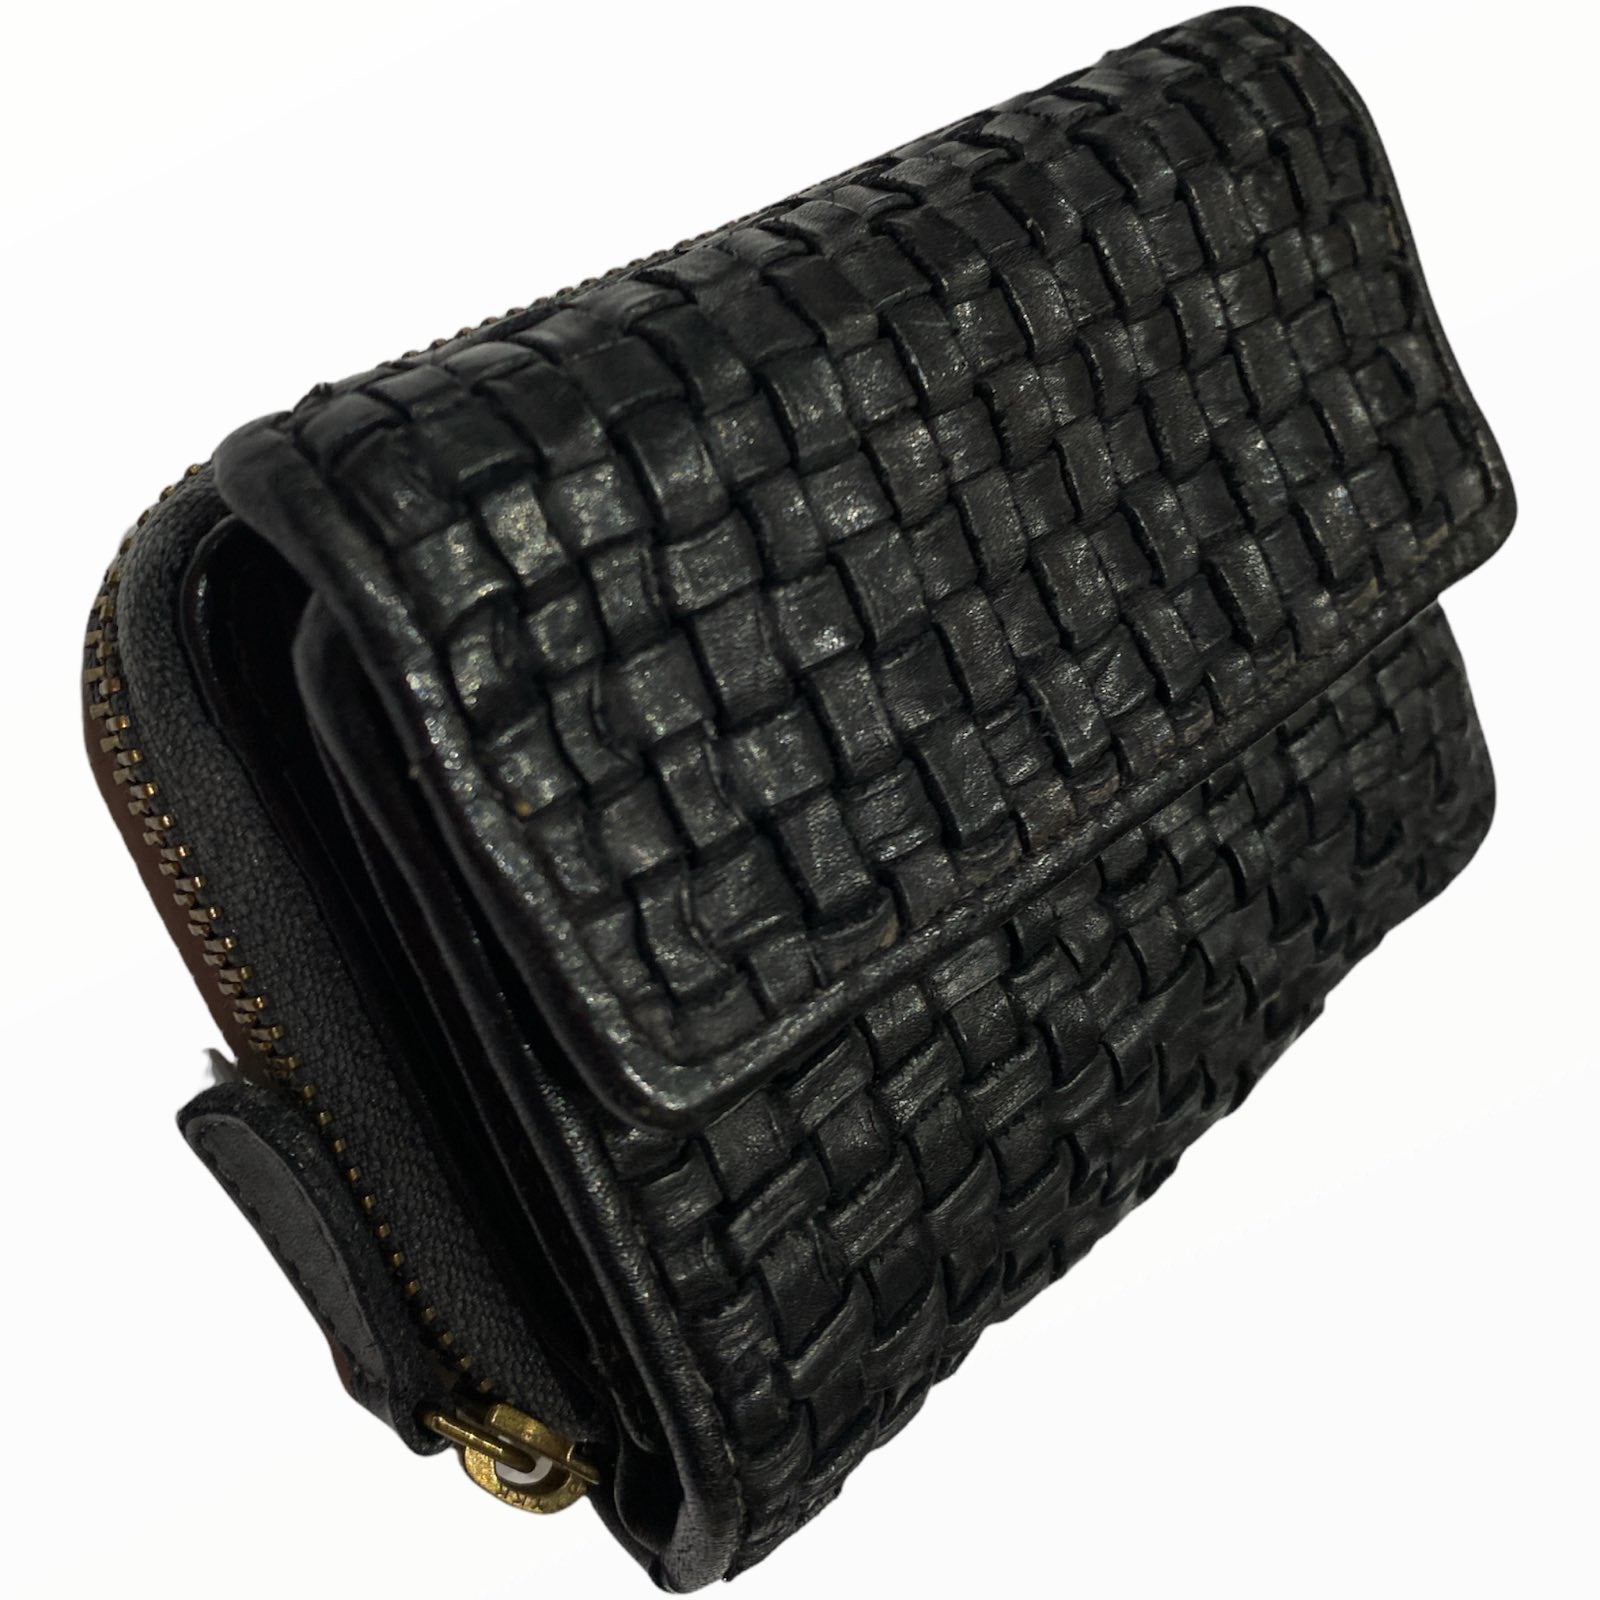 Black leather woven wallet